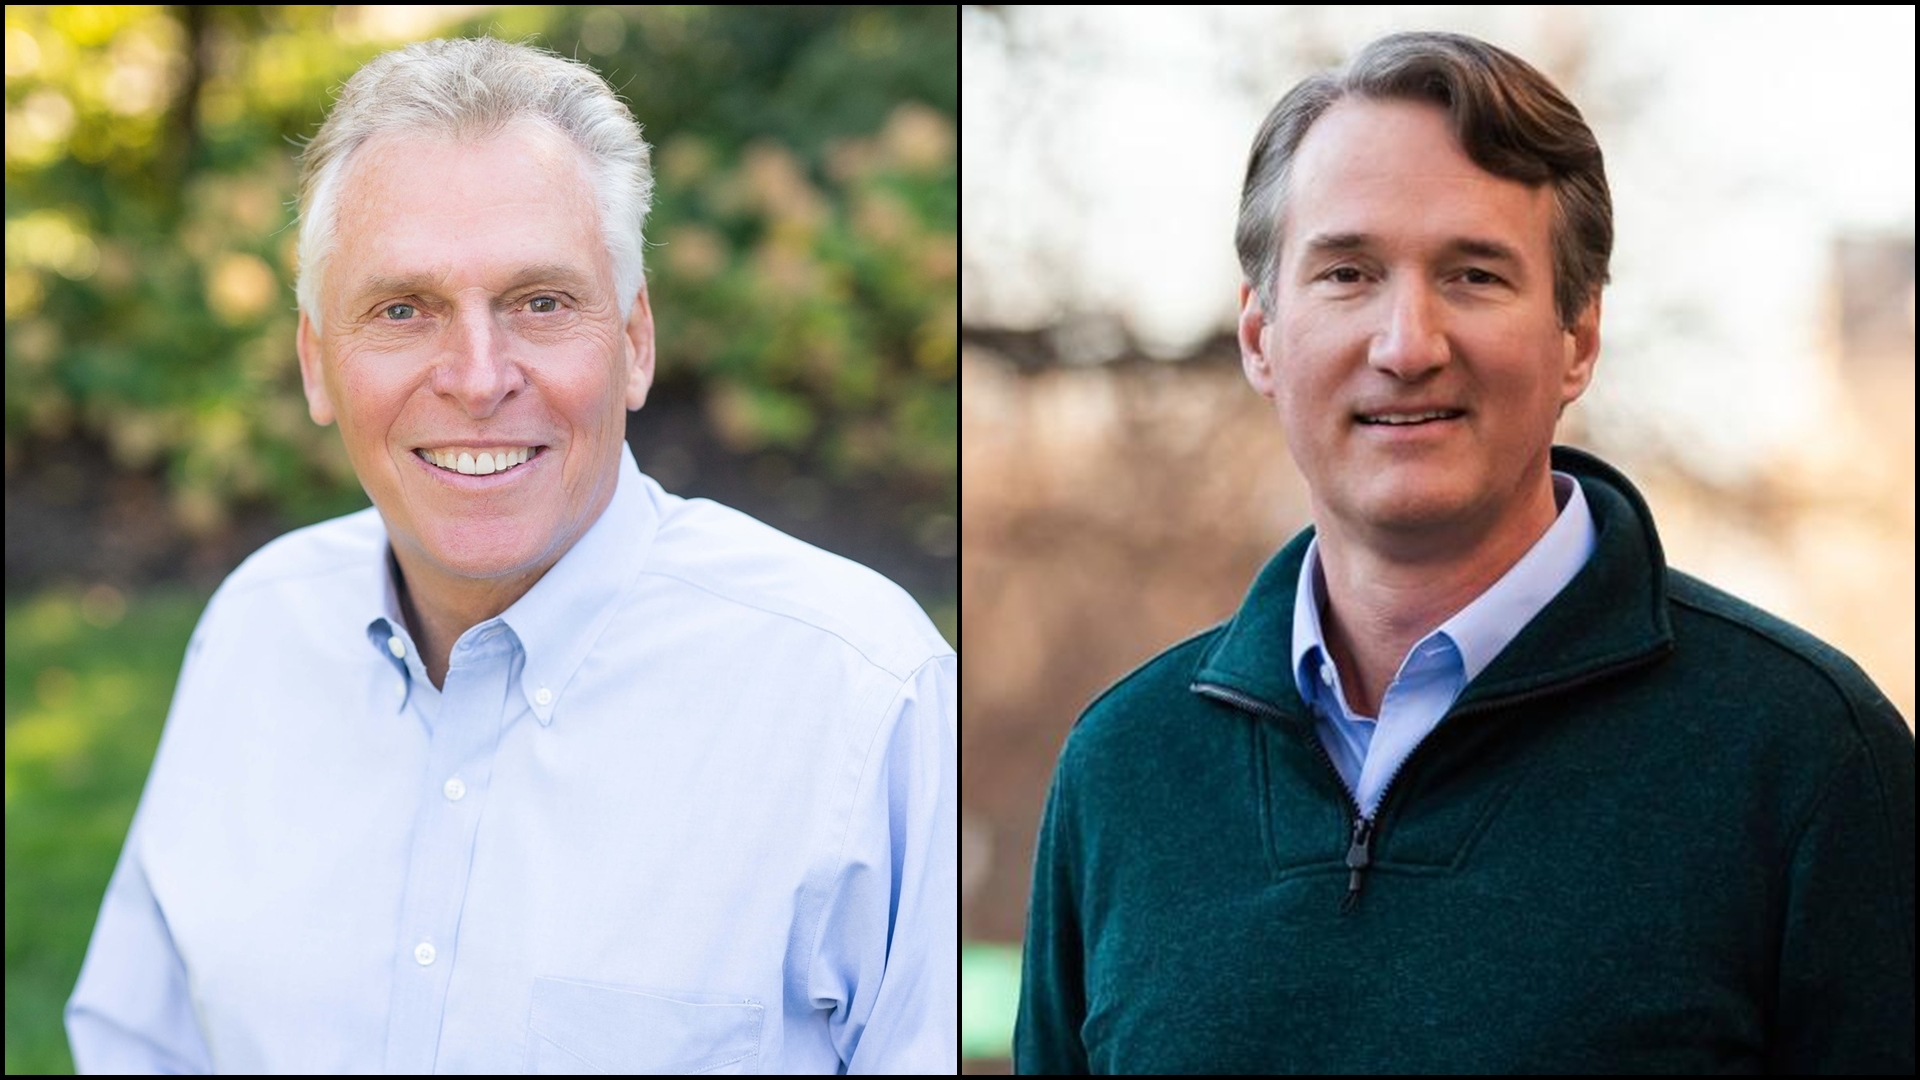 Virginia’s gubernatorial election is nearly tied with 41% of likely voters supporting Democrat Terry McAuliffe and 38% supporting Republican Glenn Youngkin, according to the latest statewide poll conducted by the Wilder School.